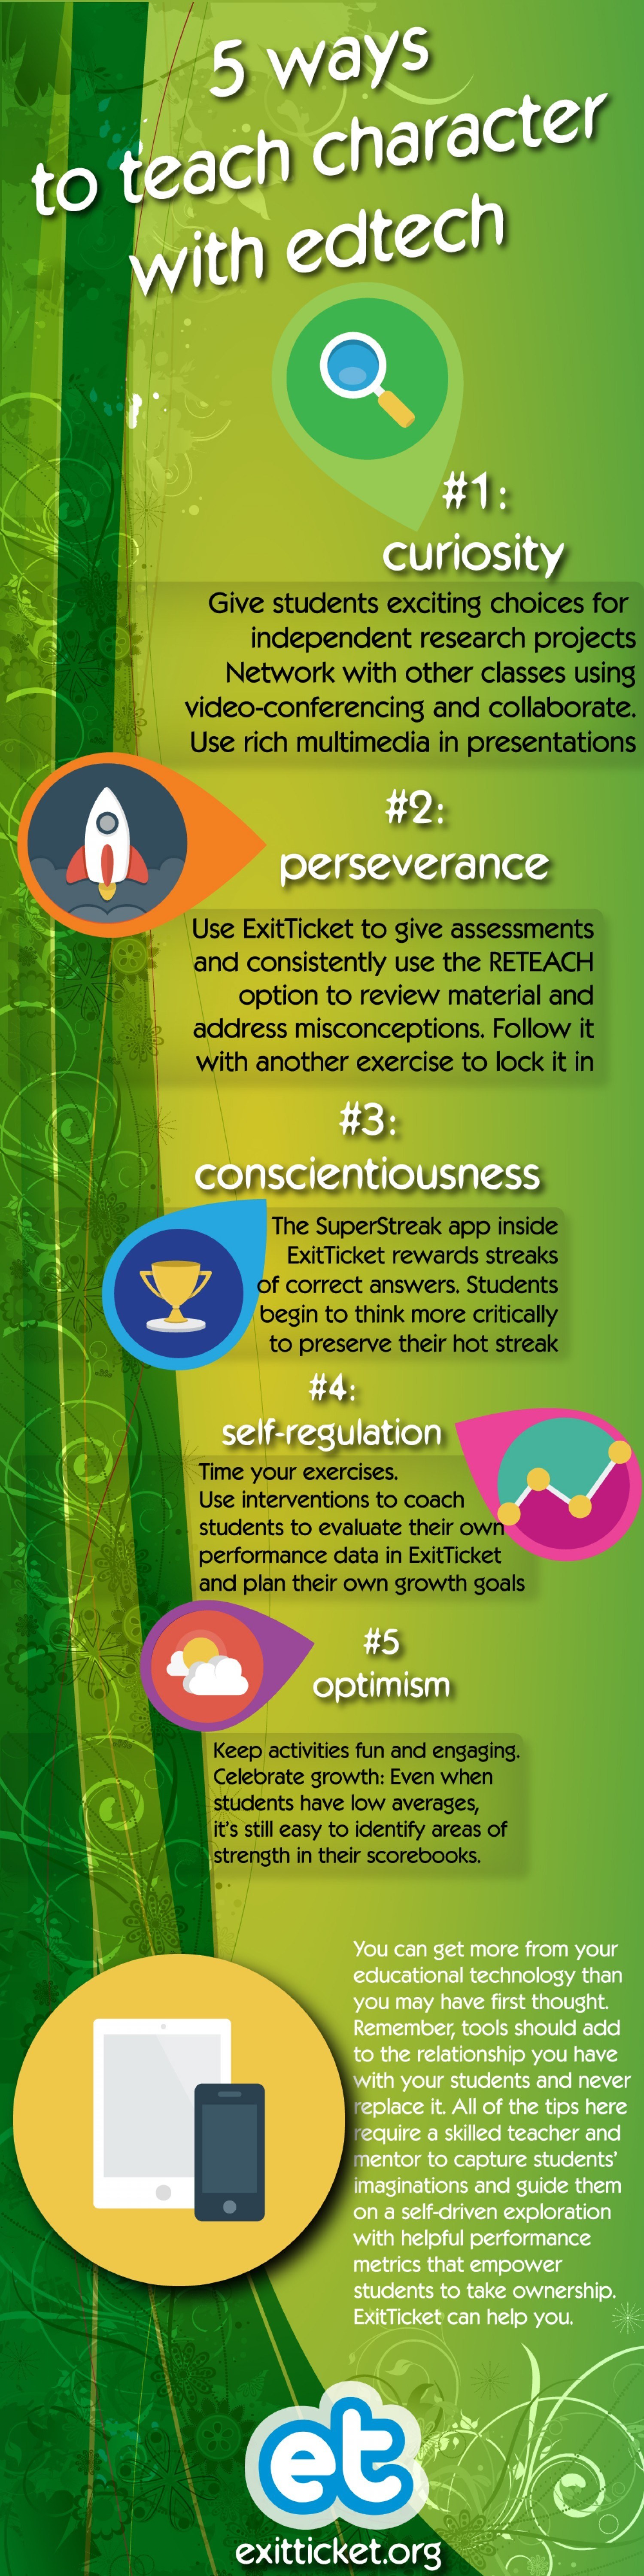 The Top 5 Tips to Teach Character with Edtech Infographic